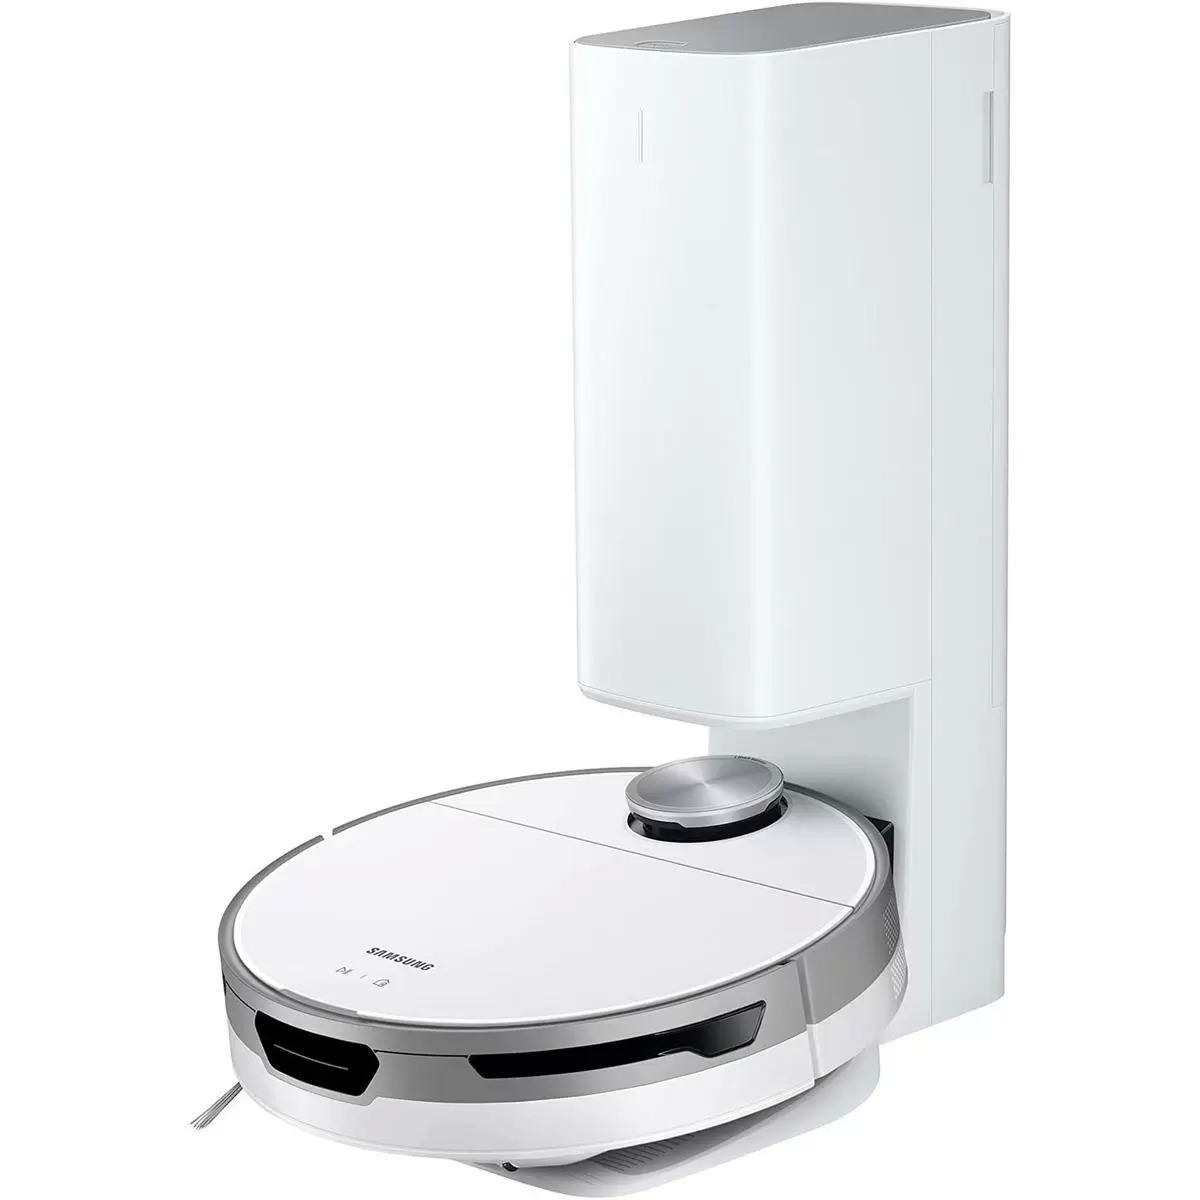 Samsung Jet Bot+ Robot Vacuum with Clean Station for $216.30 Shipped